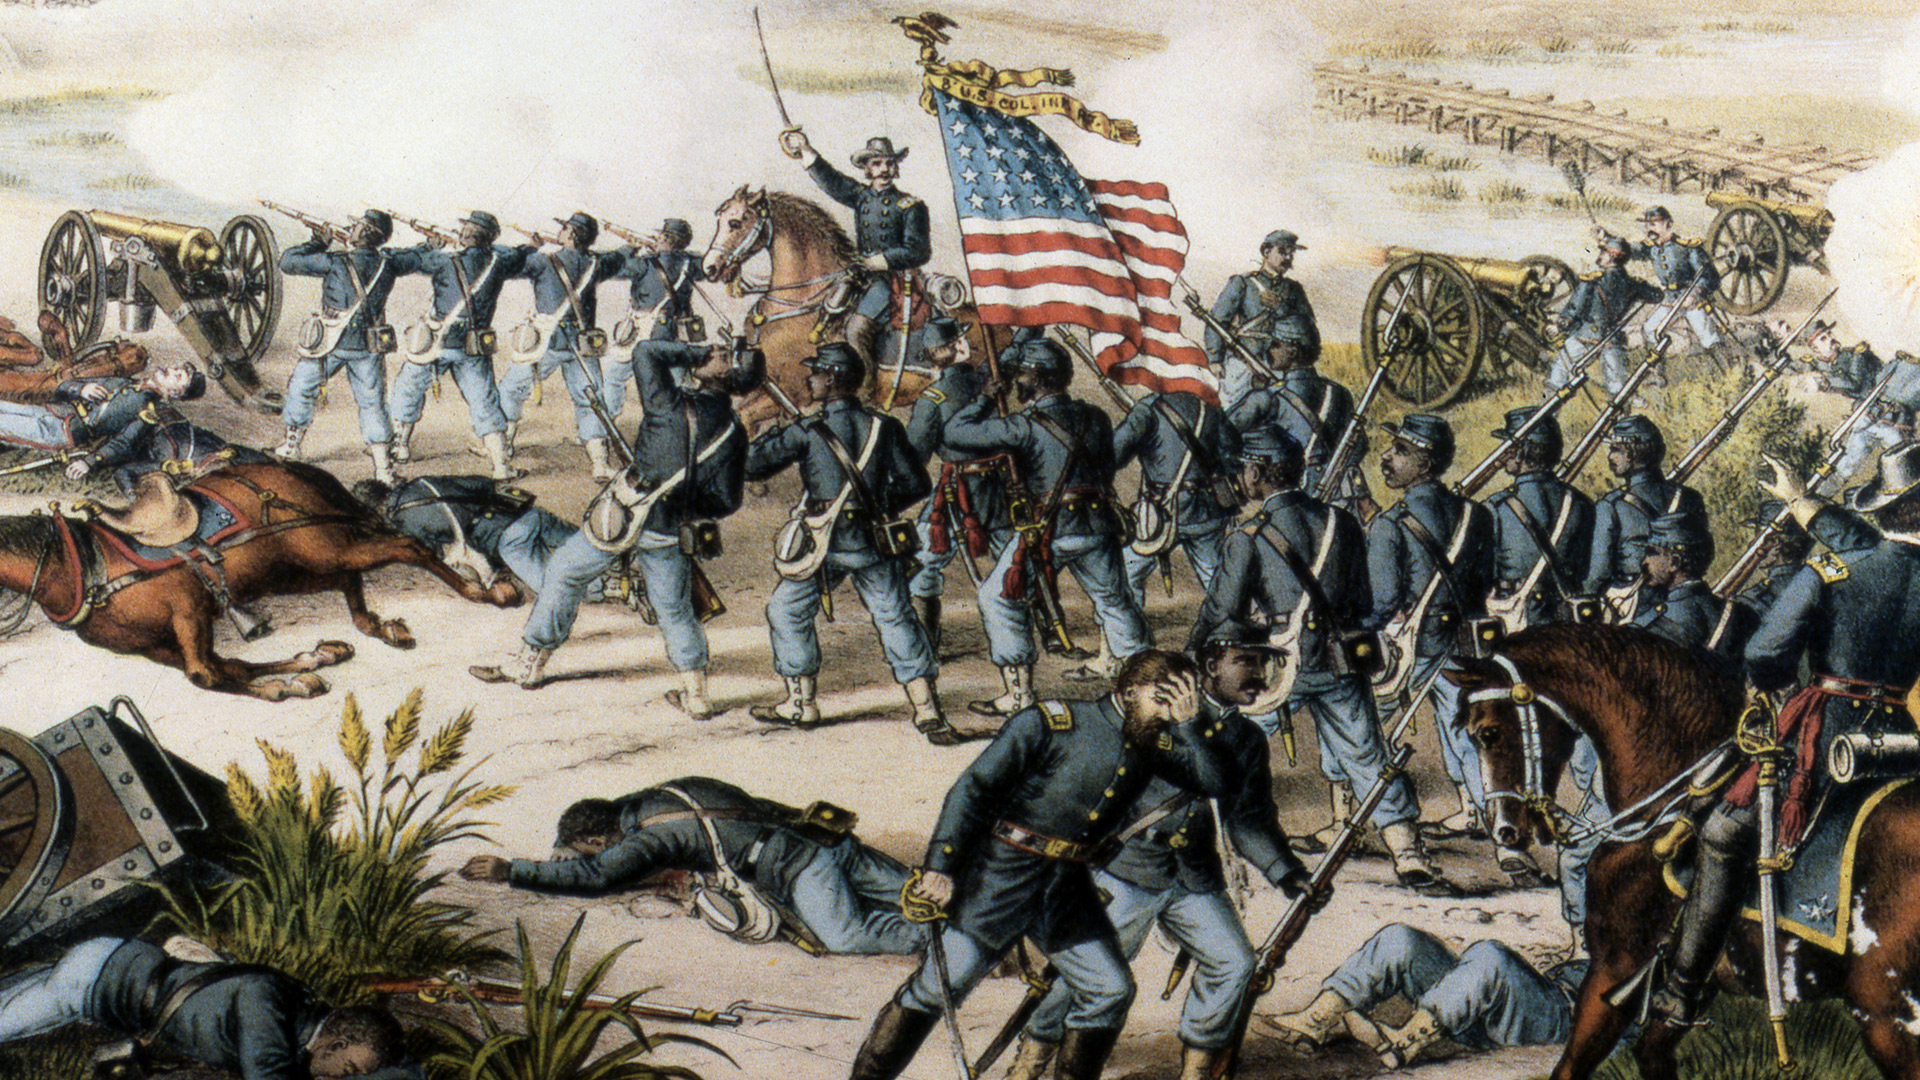 Member Event: 14th Annual Presidential Symposium - Florida and the Civil War